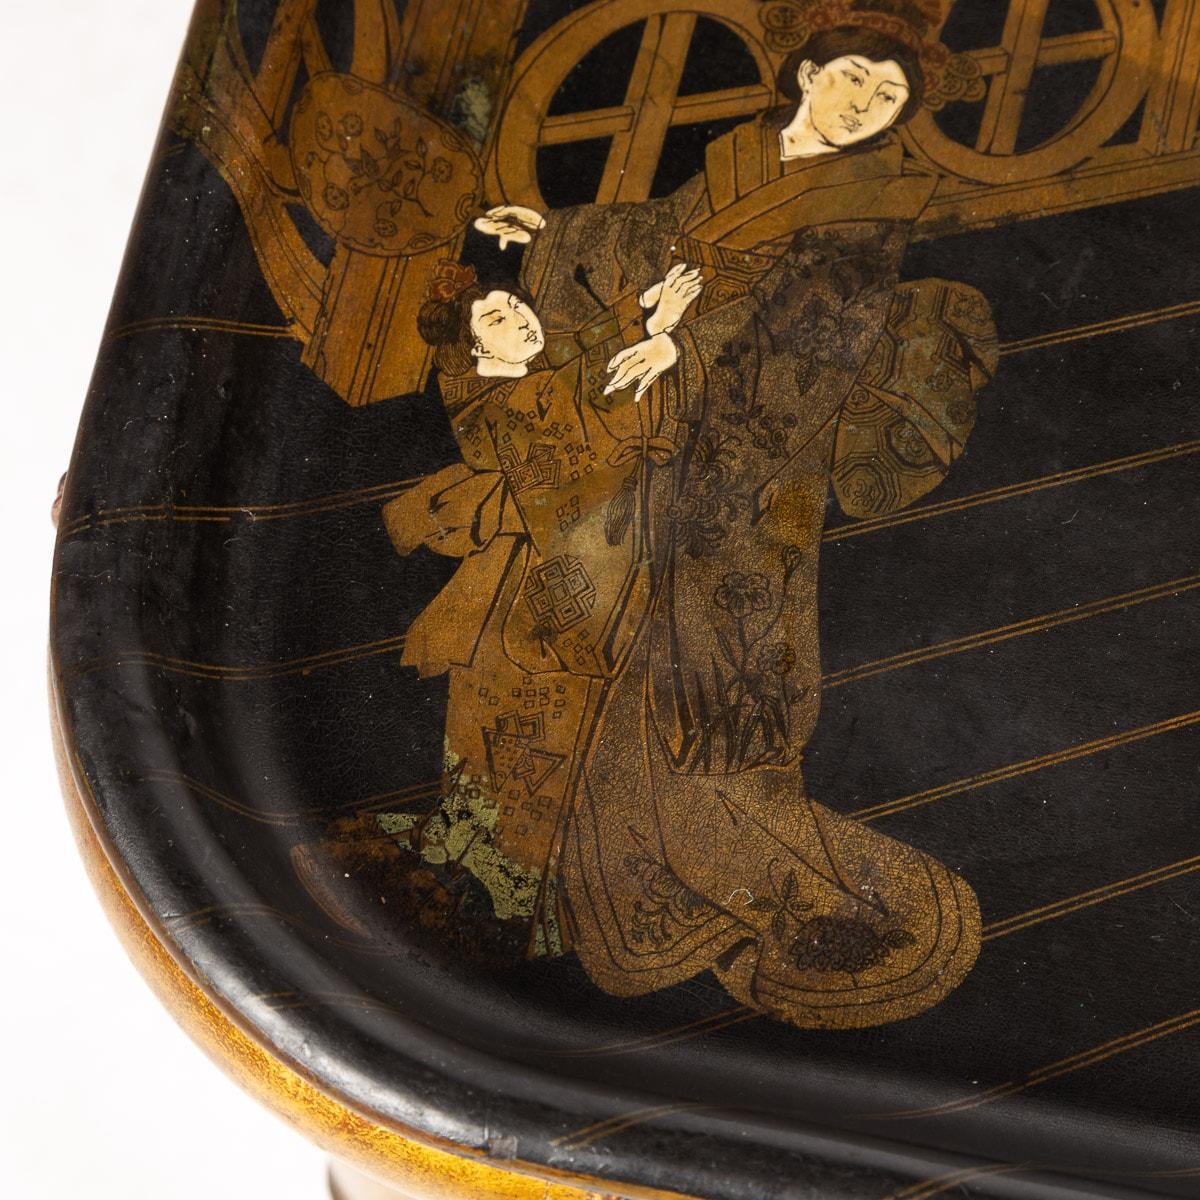 20th Century French Giltwood & Japanese Style Lacquer Table with Tray, C.1880 For Sale 5